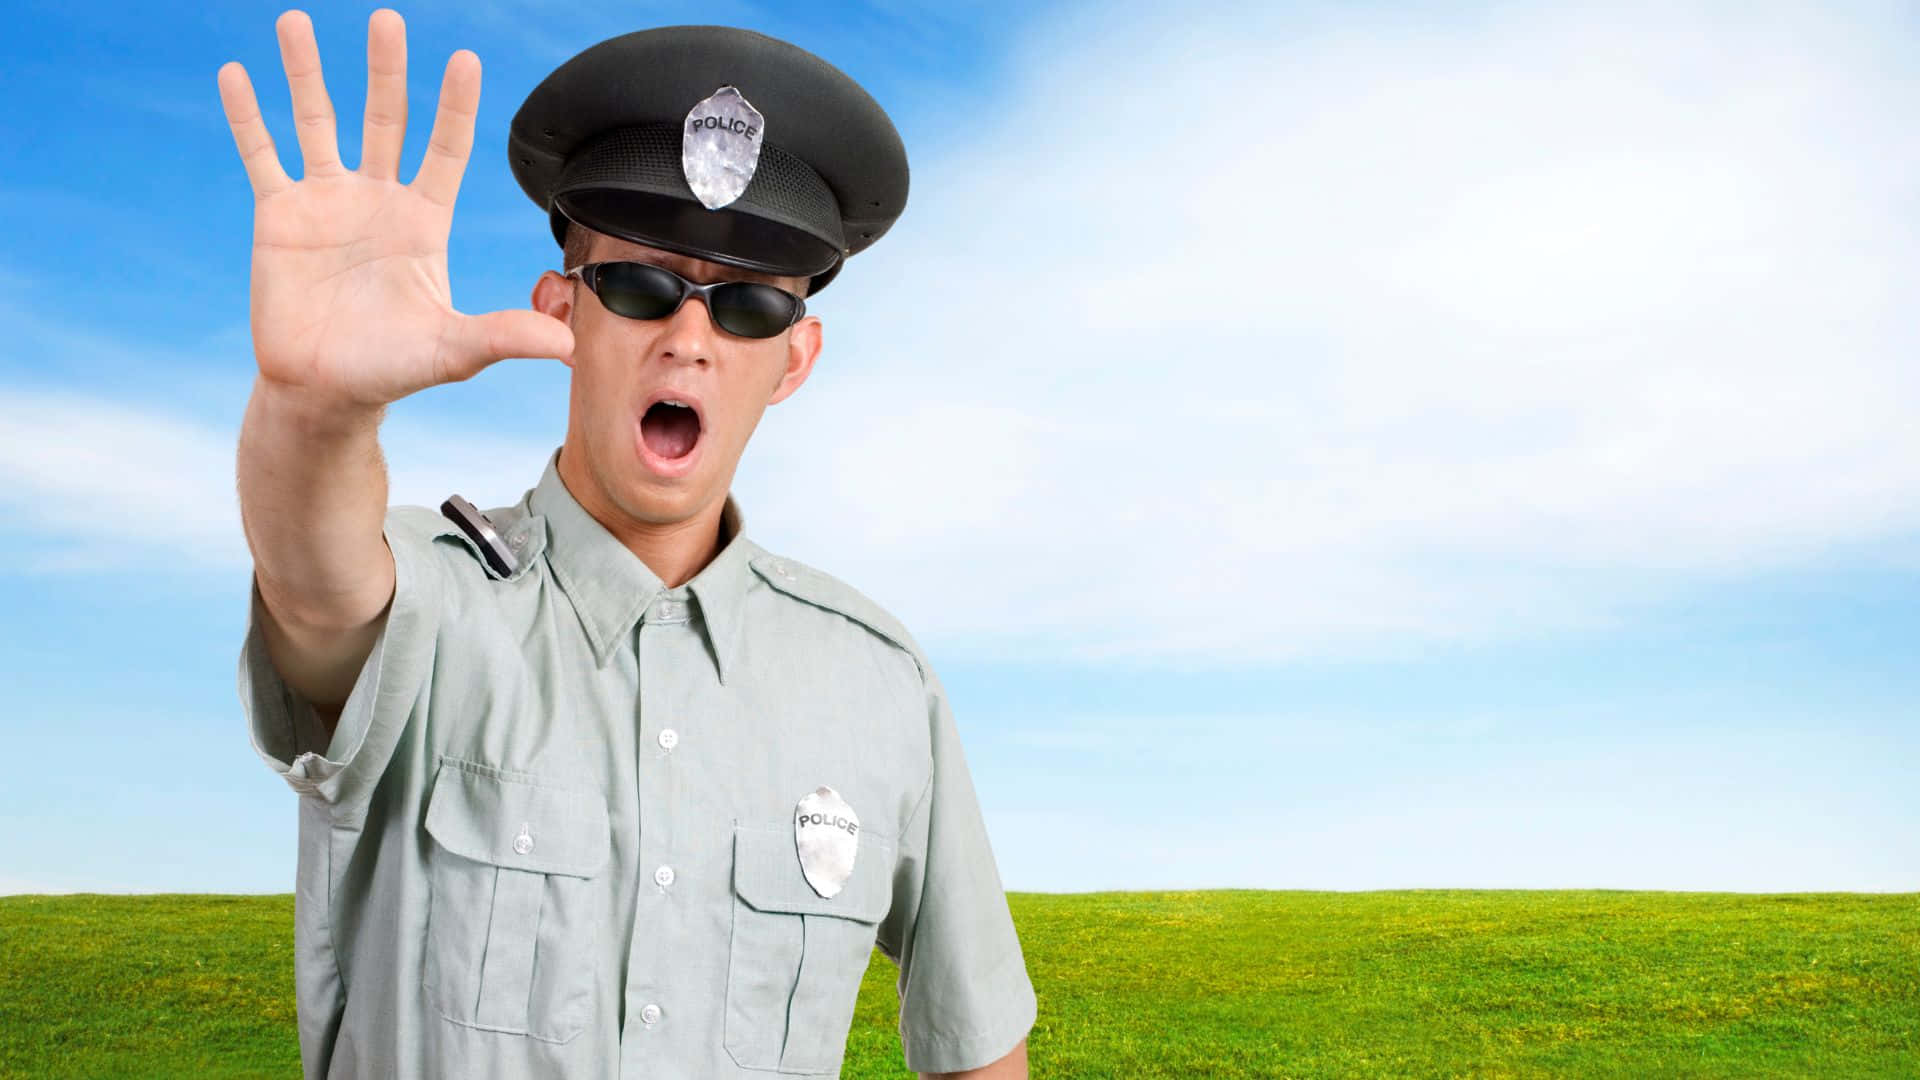 Cop Police Officer With Stop Hand Gesture